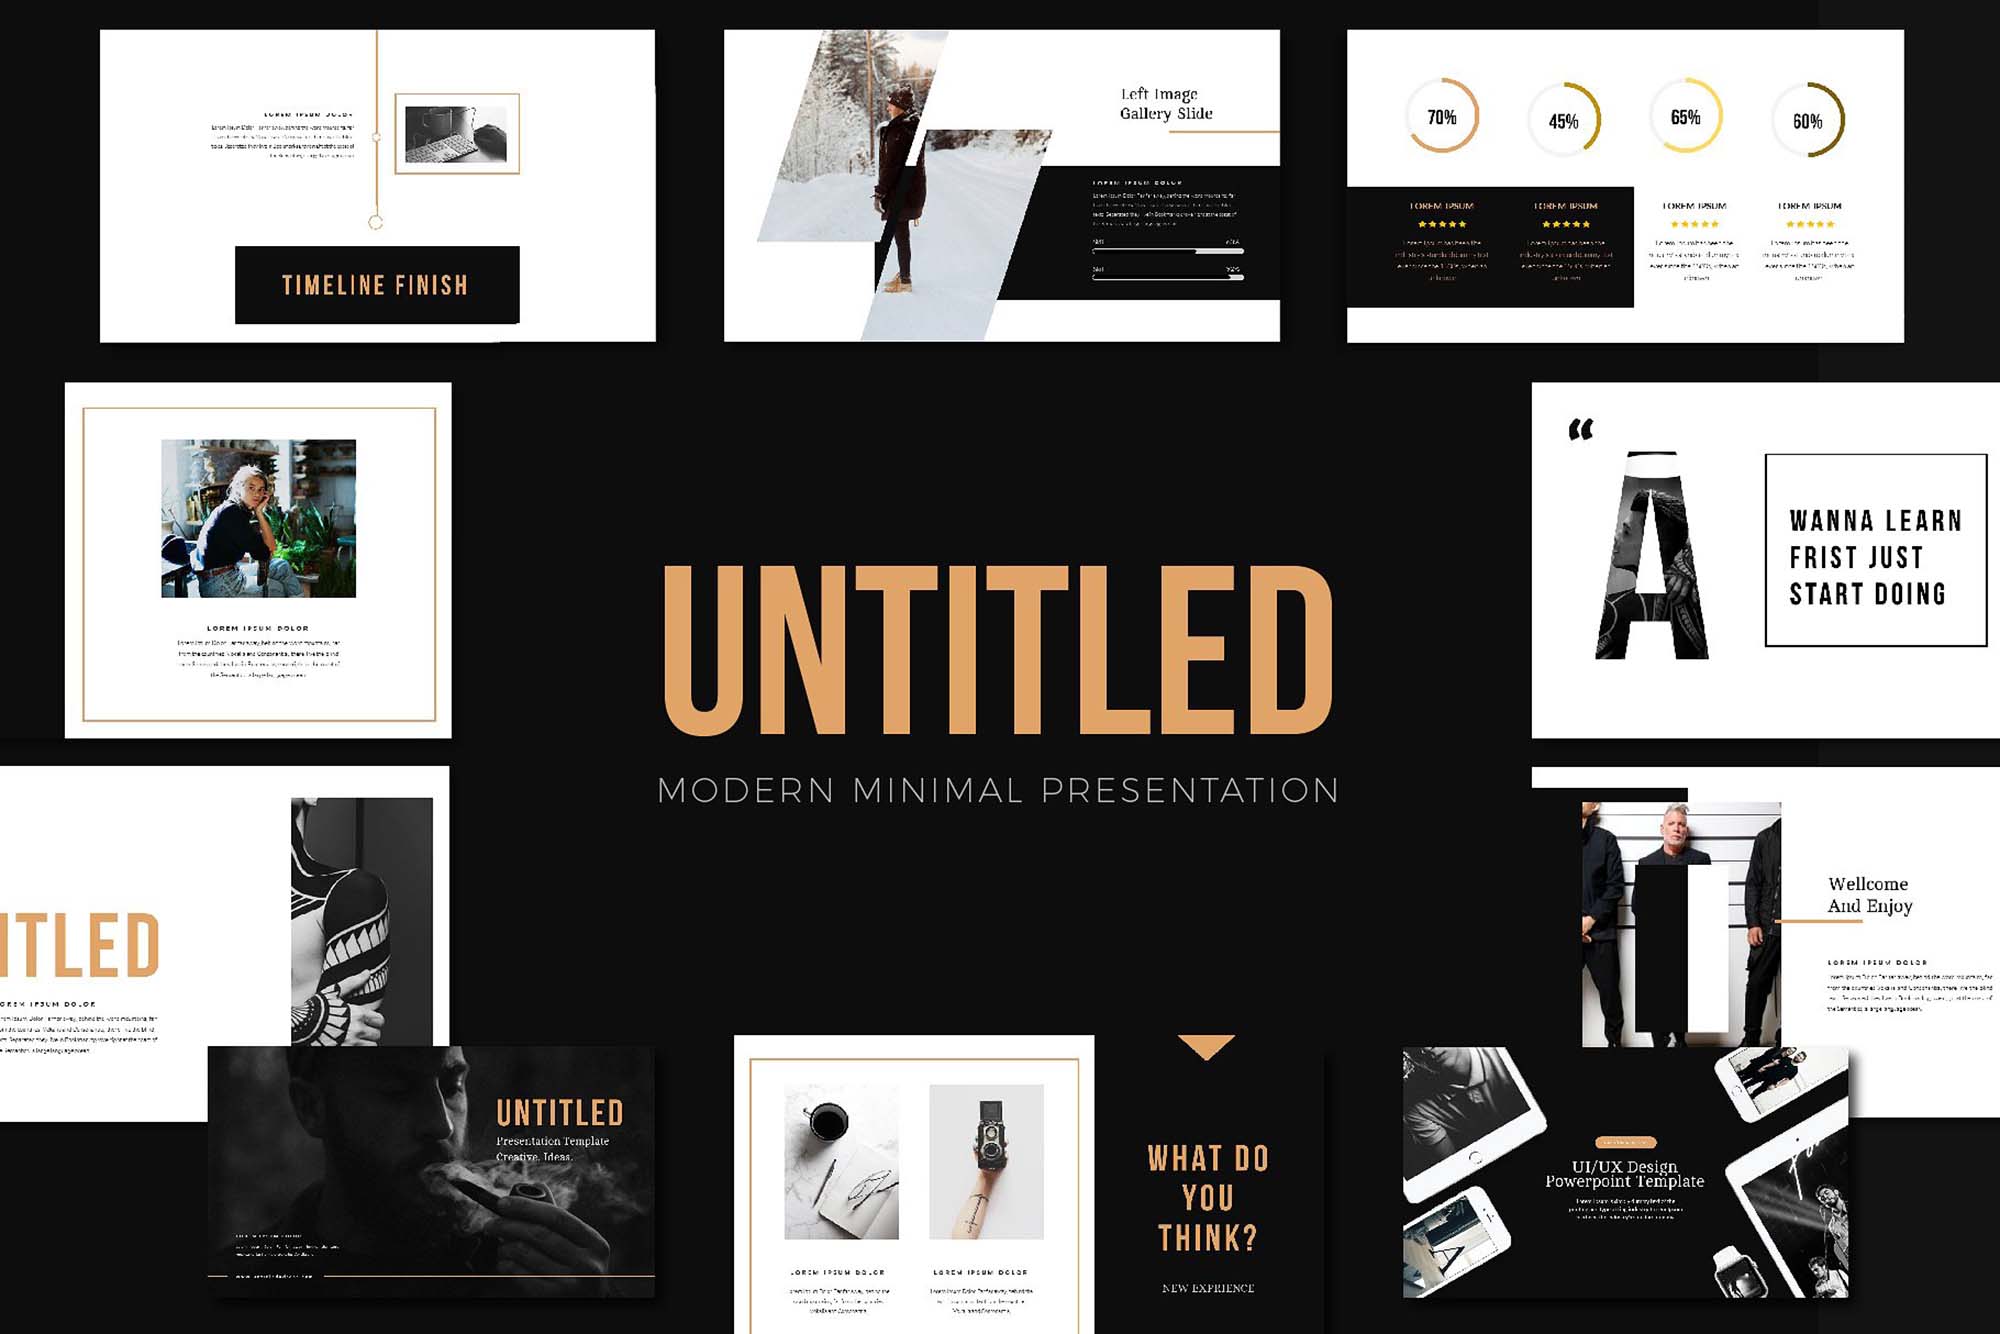 Untitled PowerPoint Presentation Template